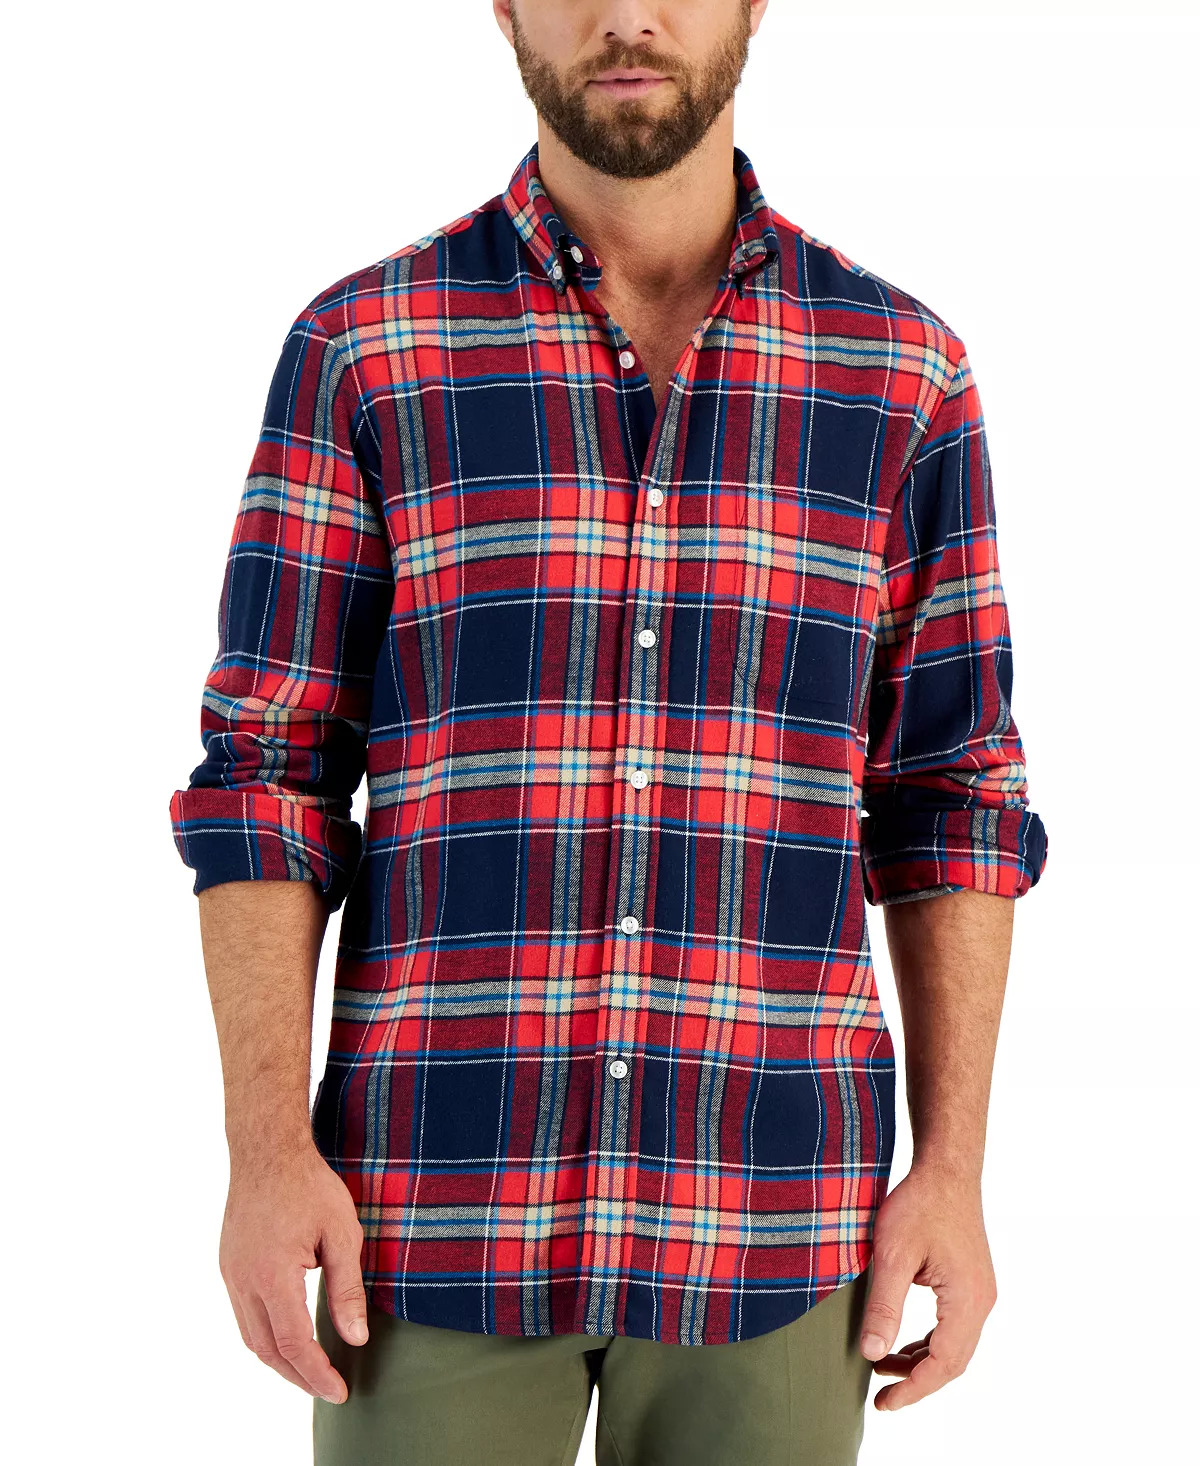 Club Room Men's Regular-Fit Plaid Flannel Shirt (Various) $9.86 + Free Store Pickup at Macy's or Free Shipping on $25+